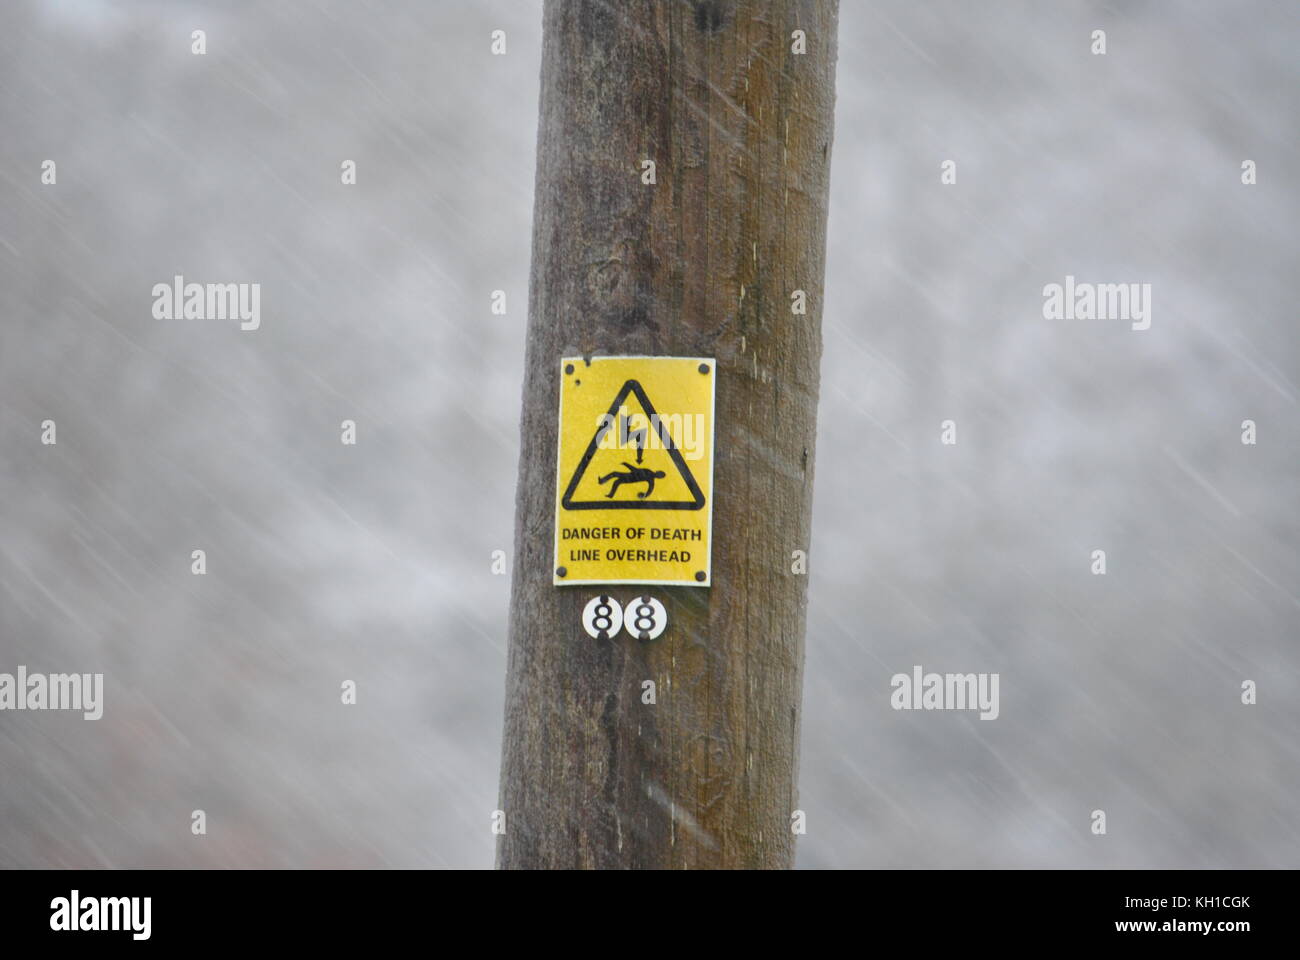 Danger of Death Warning Sign, taken during a blizzard. Scotland. Stock Photo